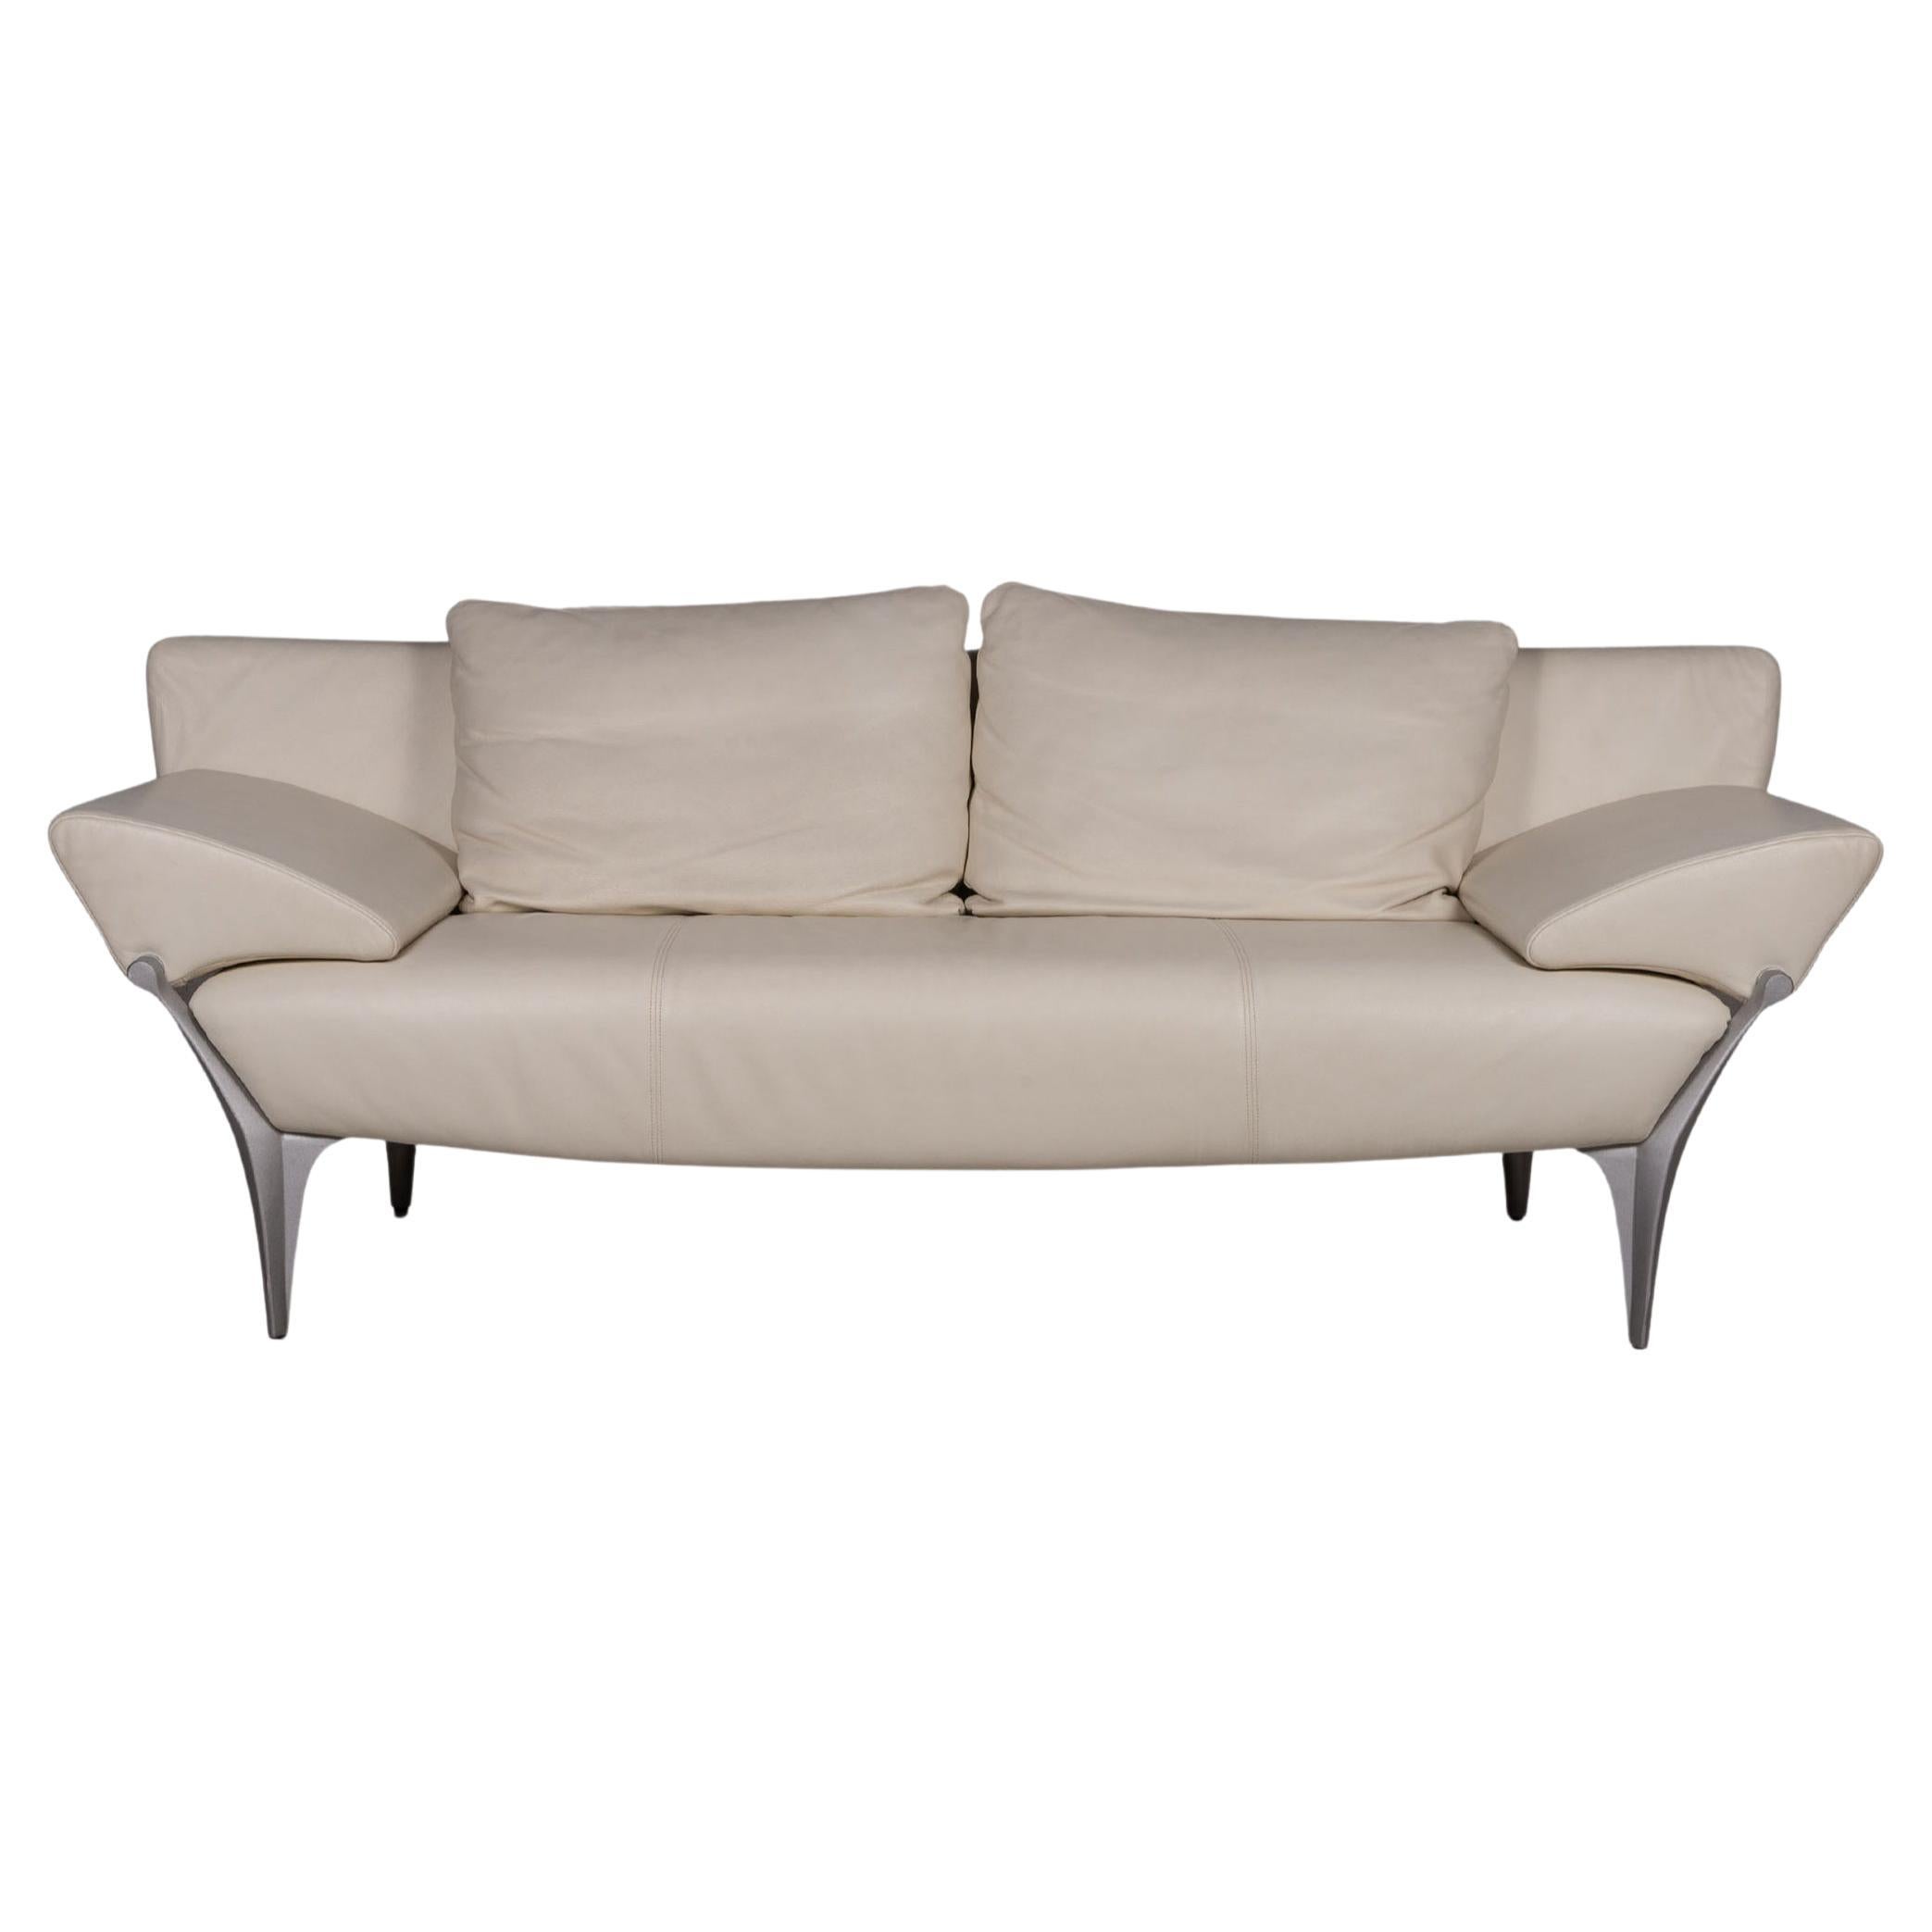 Rolf Benz 1600 Leather Sofa Cream Three-Seater Couch Function For Sale